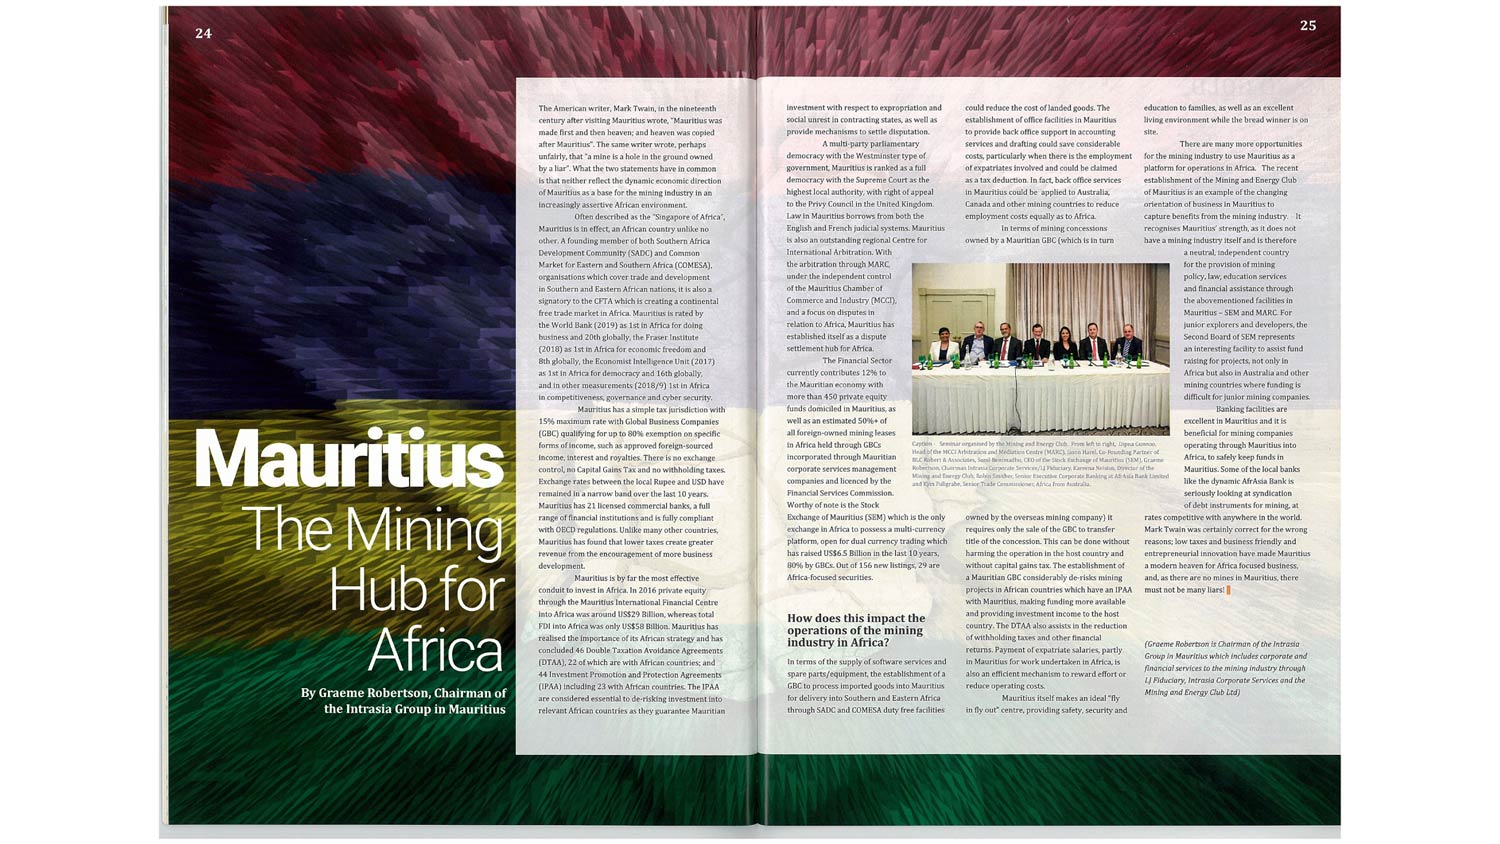 Mauritius: The Mining Hub For Africa